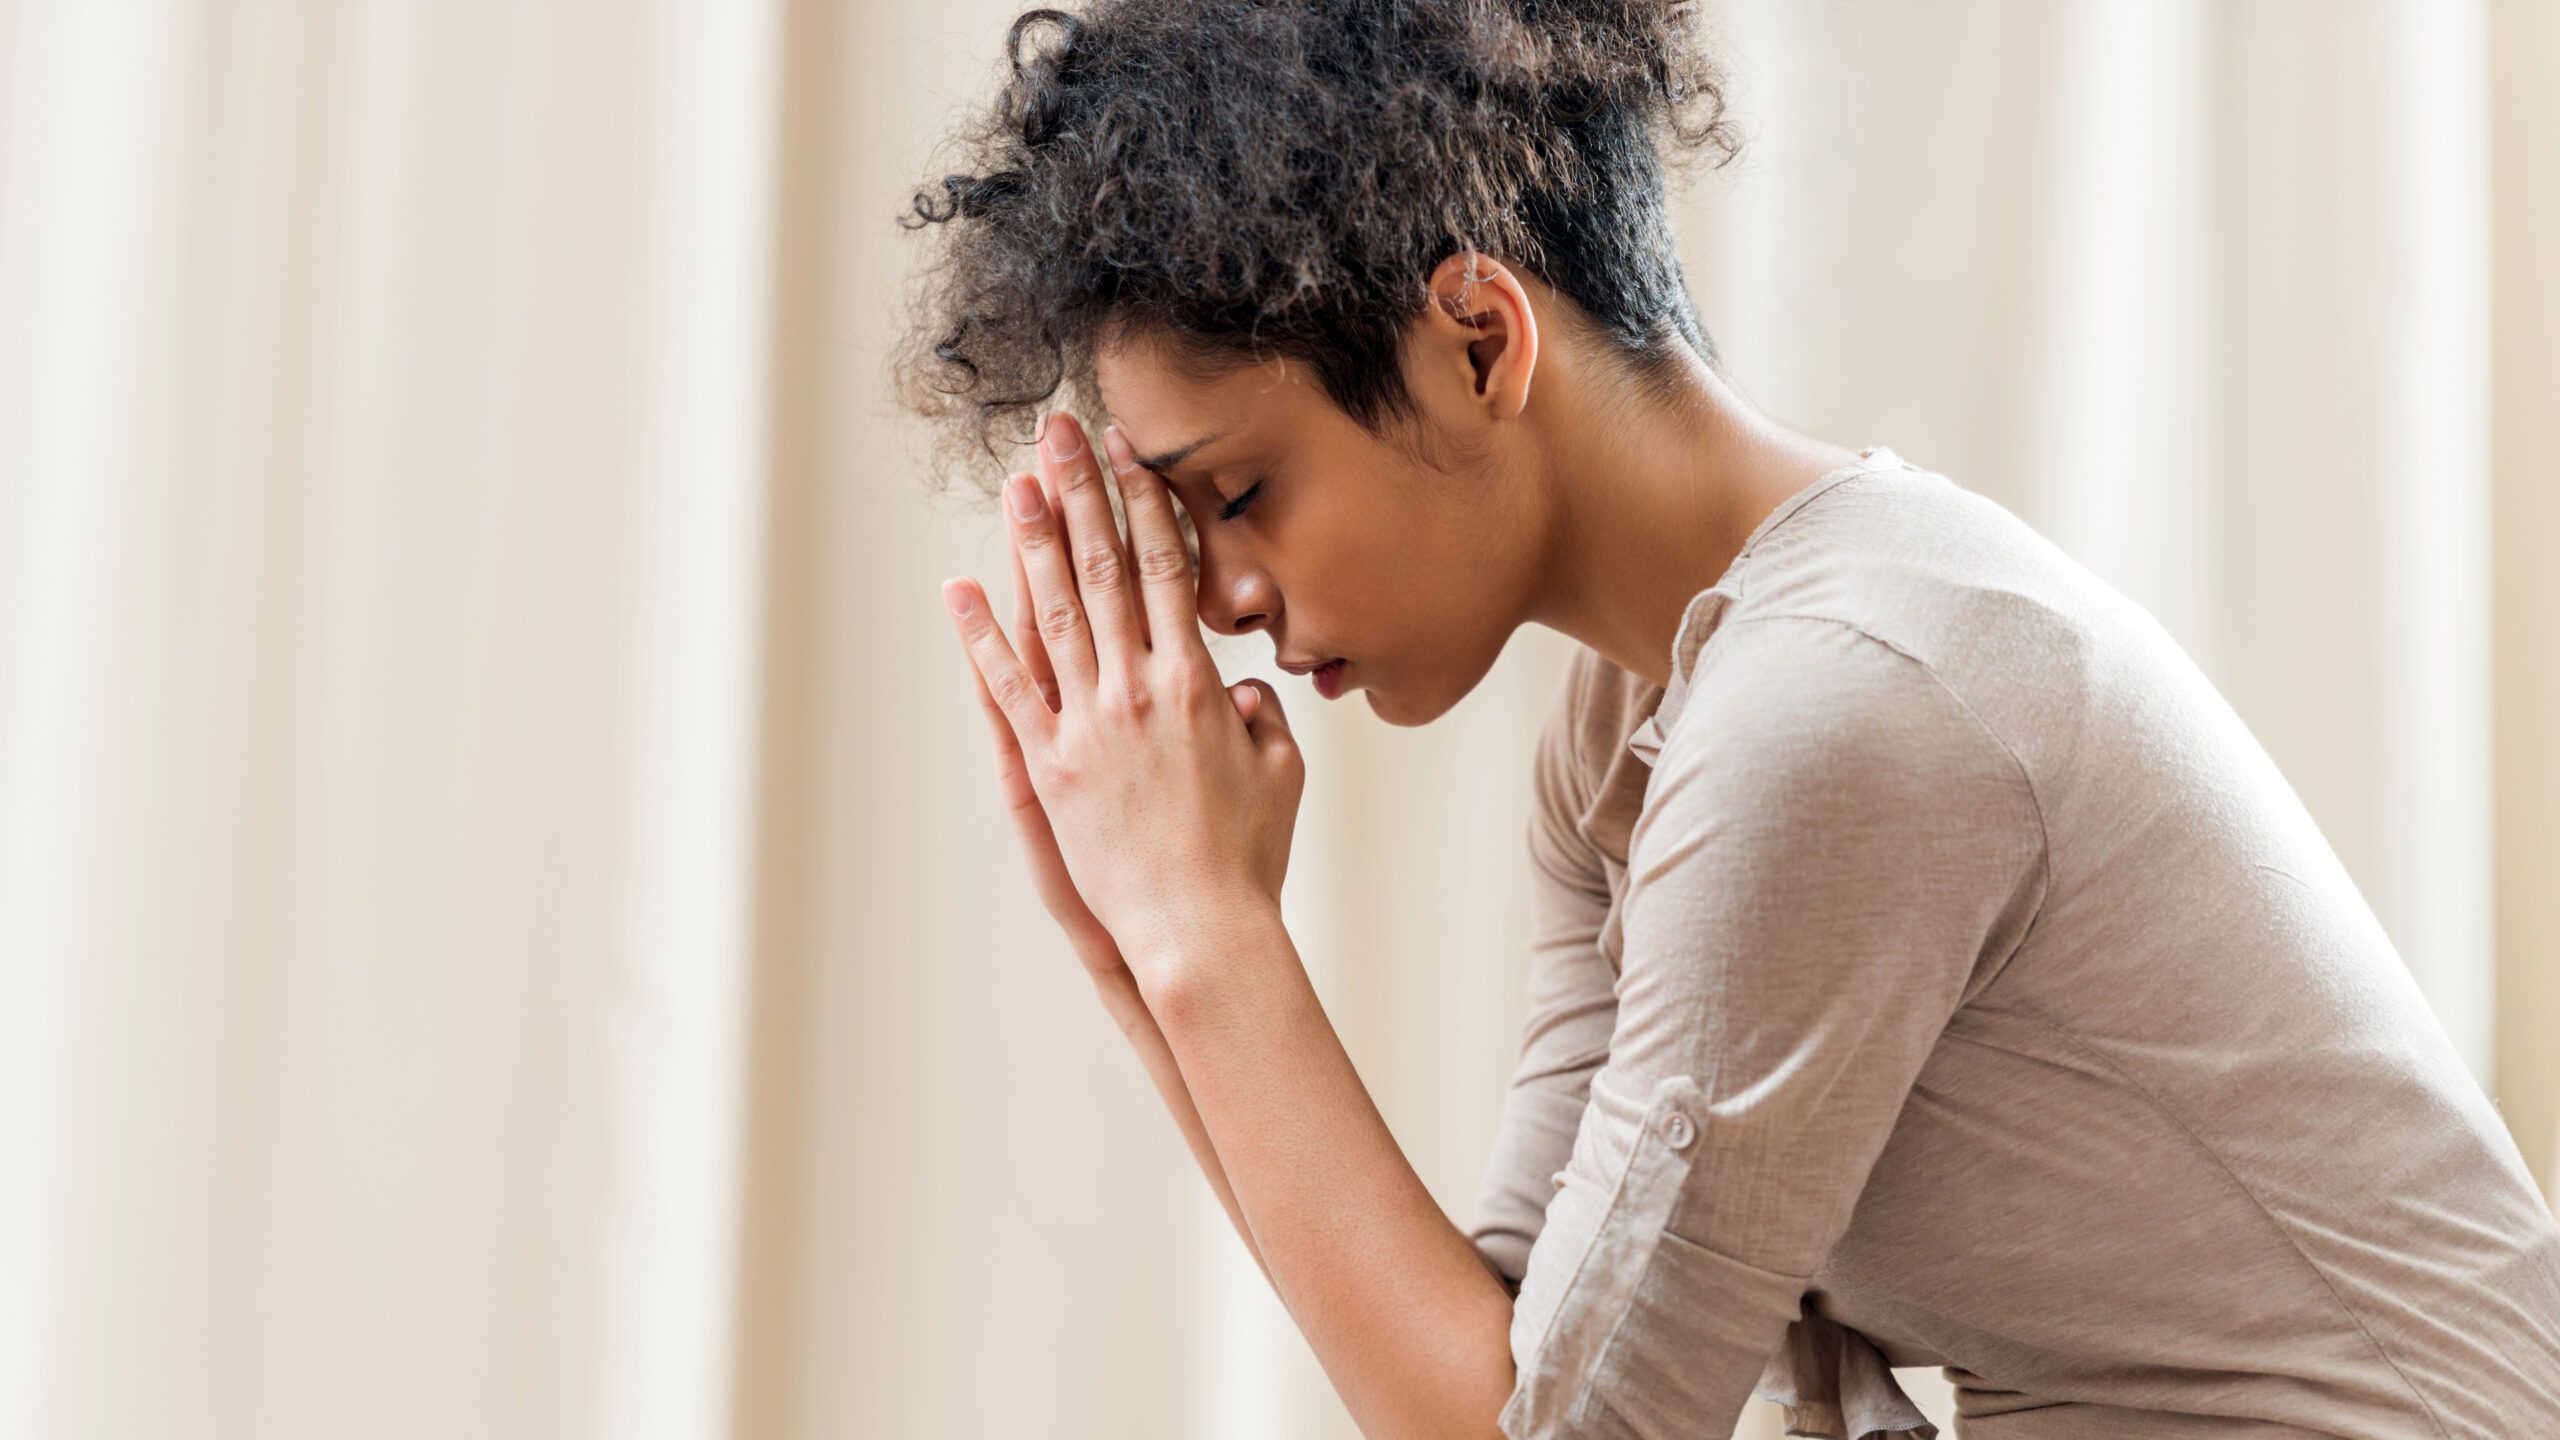 6 Prayers for When You Don’t Know What to Do